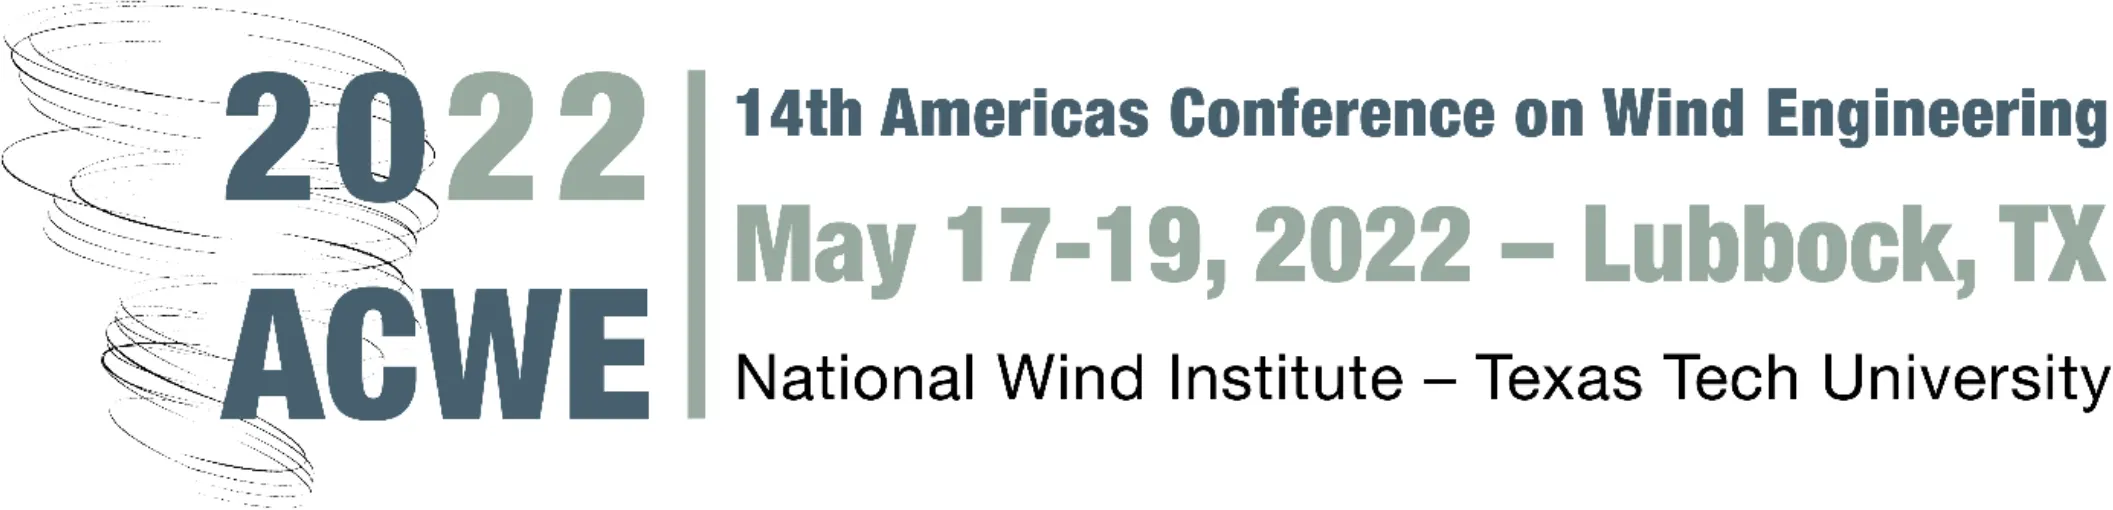 2022 14th Americas Conference On Wind Engineering